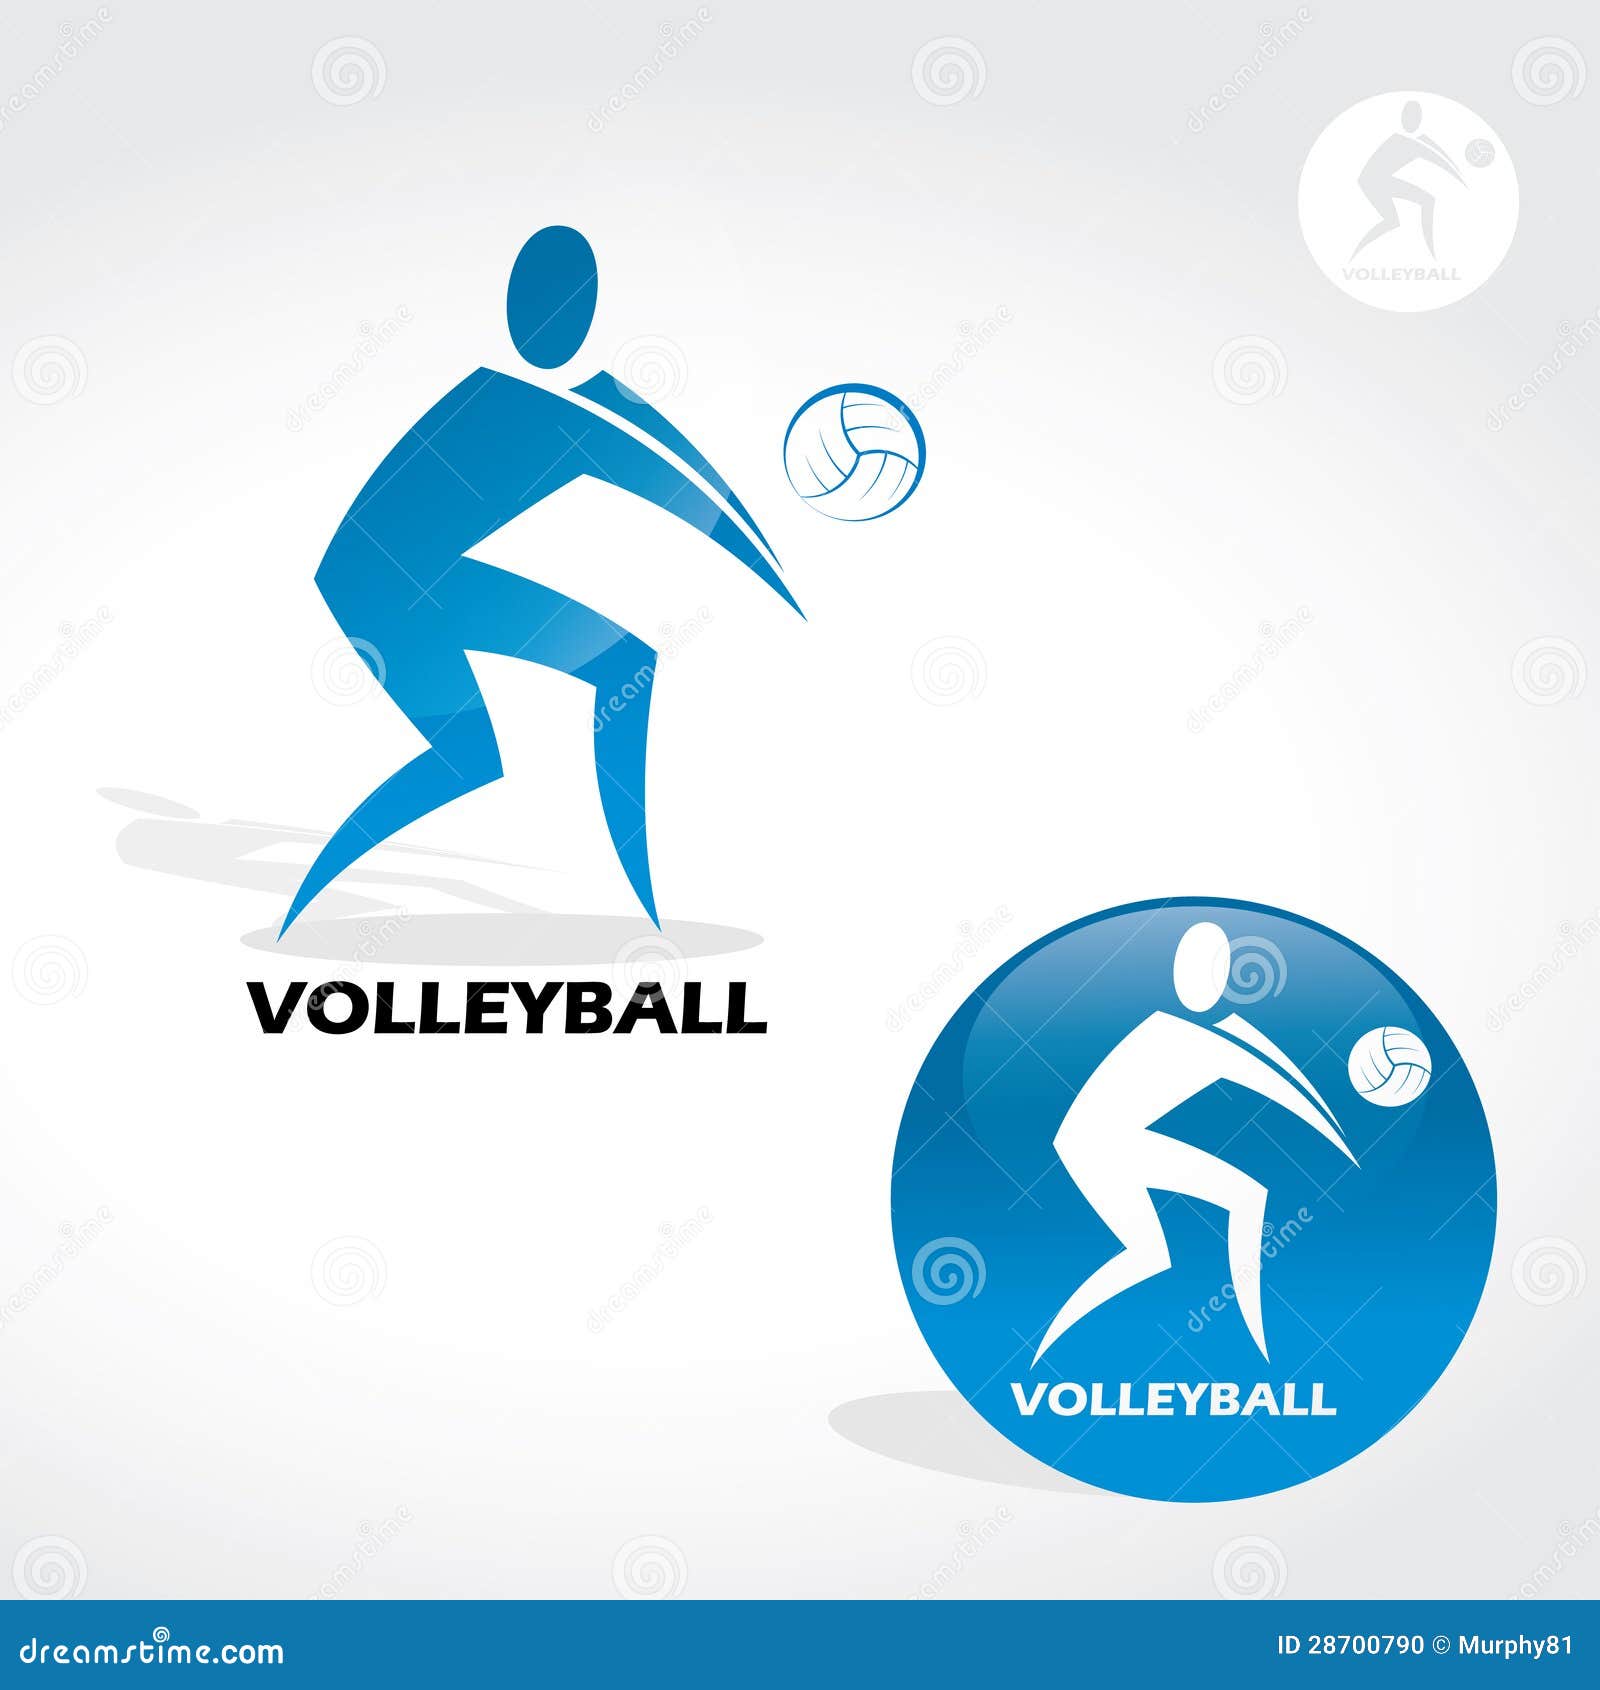 Volleyball sign stock vector. Illustration of game, ball - 28700790